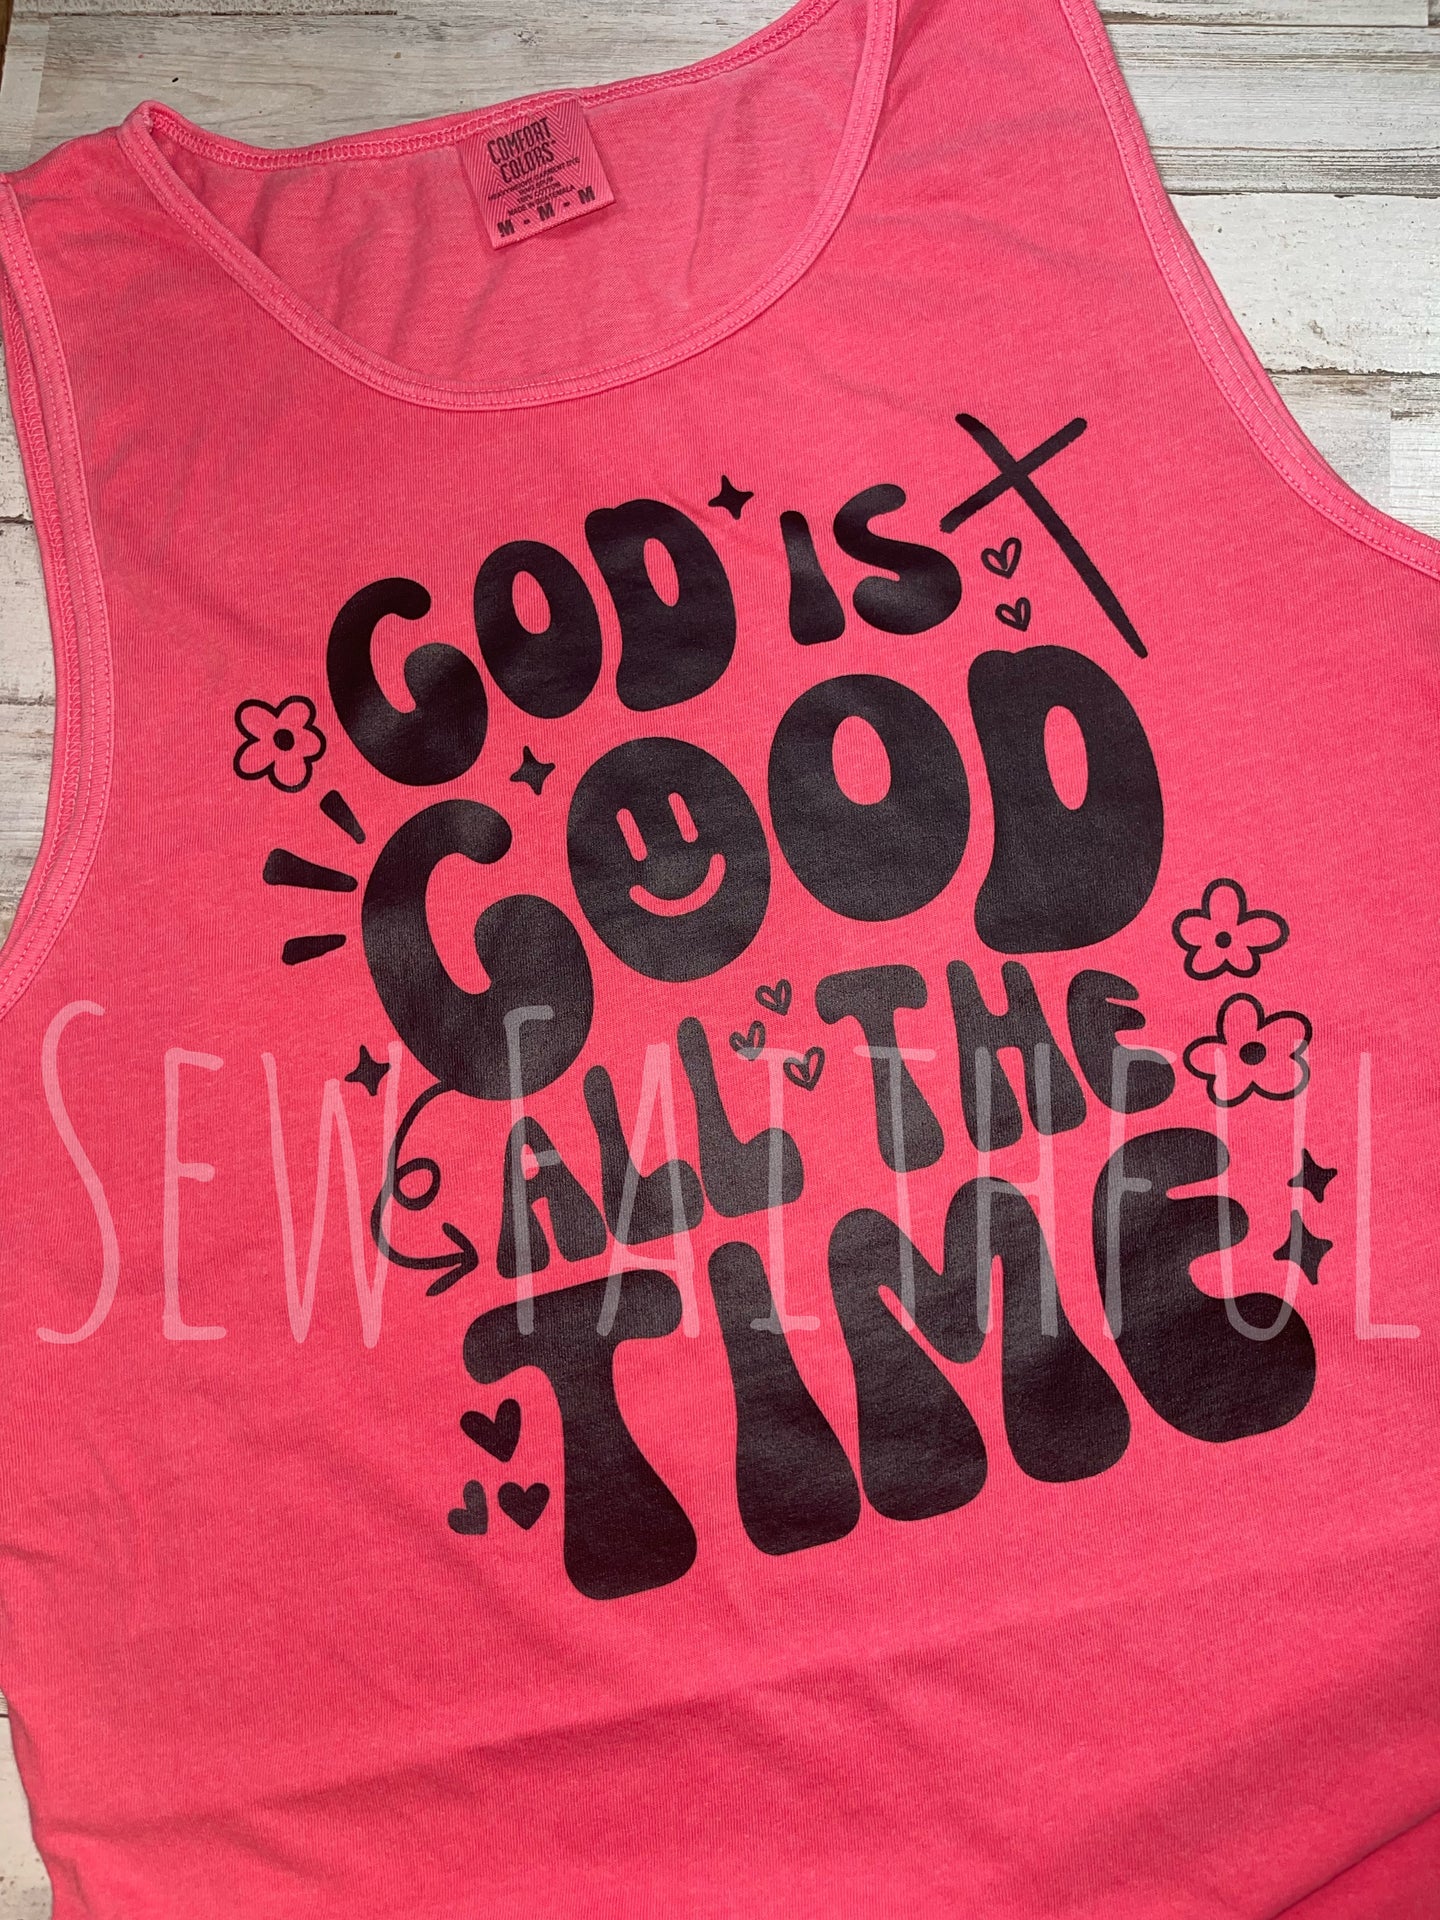 God is good all the time…